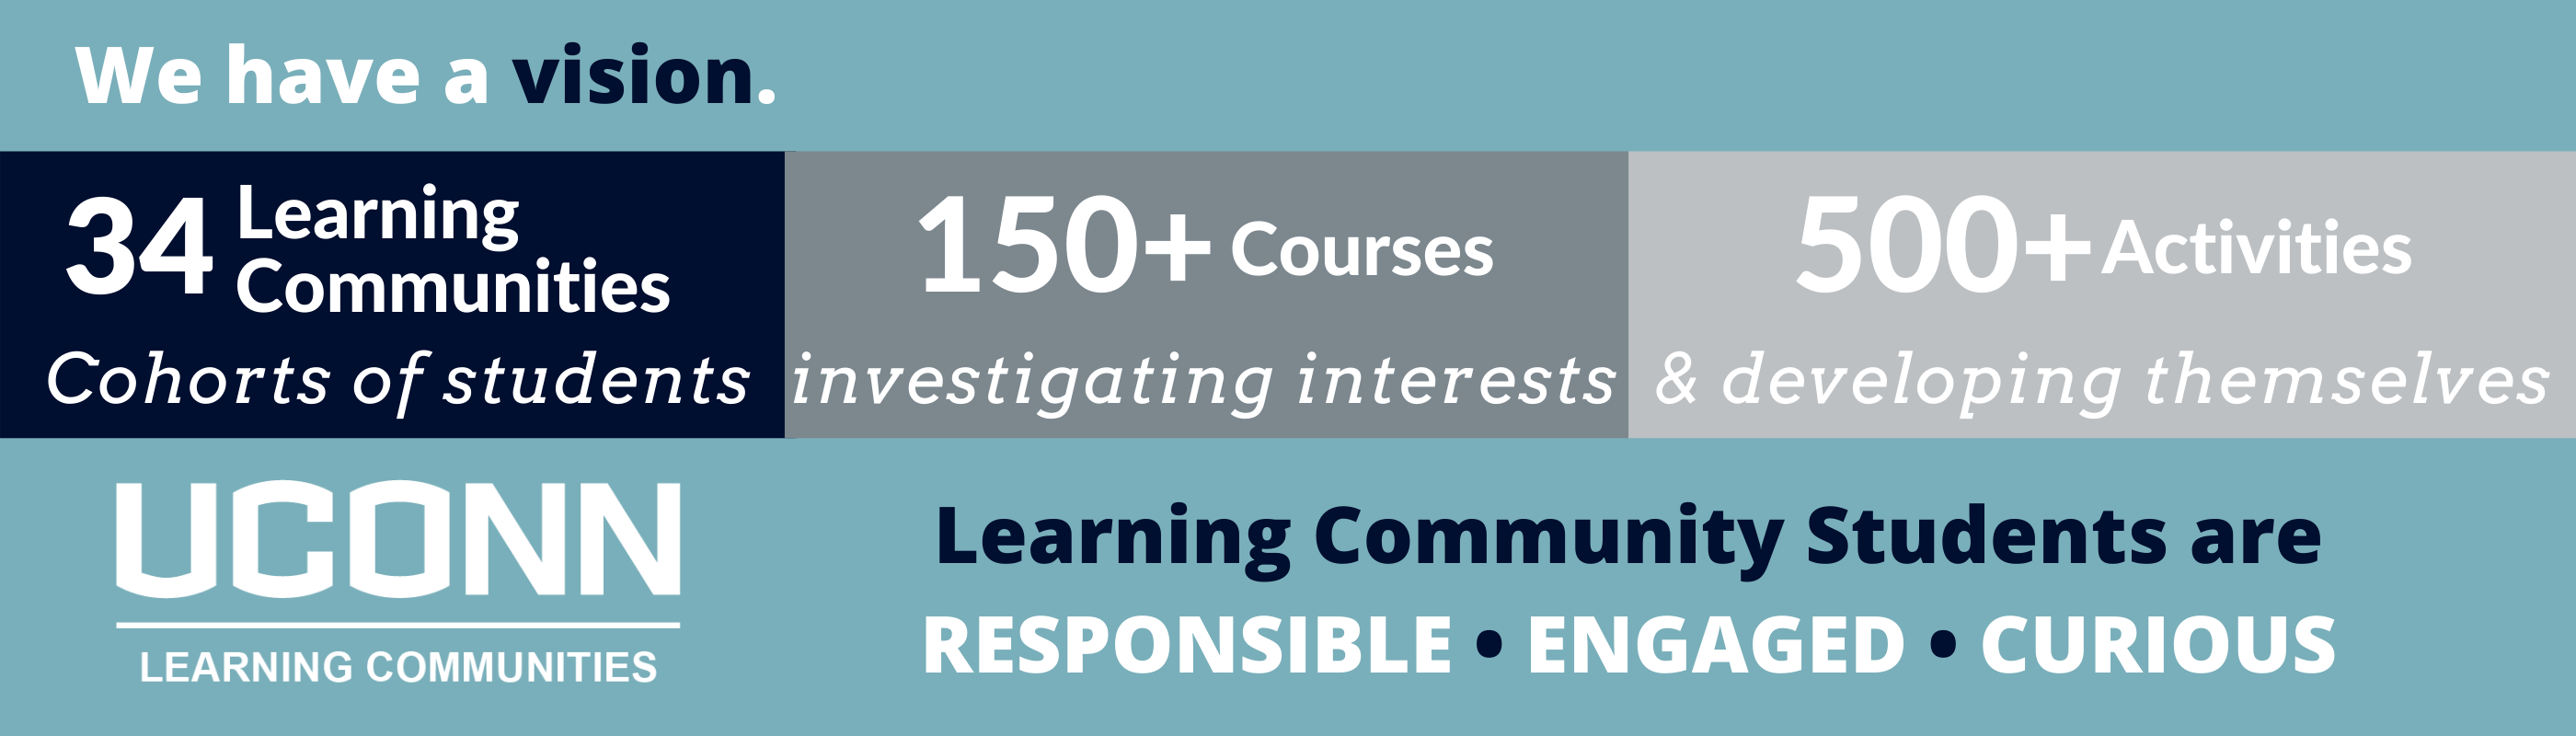 Vision: 33 Learning Communities provide cohorts of students opportunities to investigate areas of interest and develop themselves through 150+ courses and 500+ activities